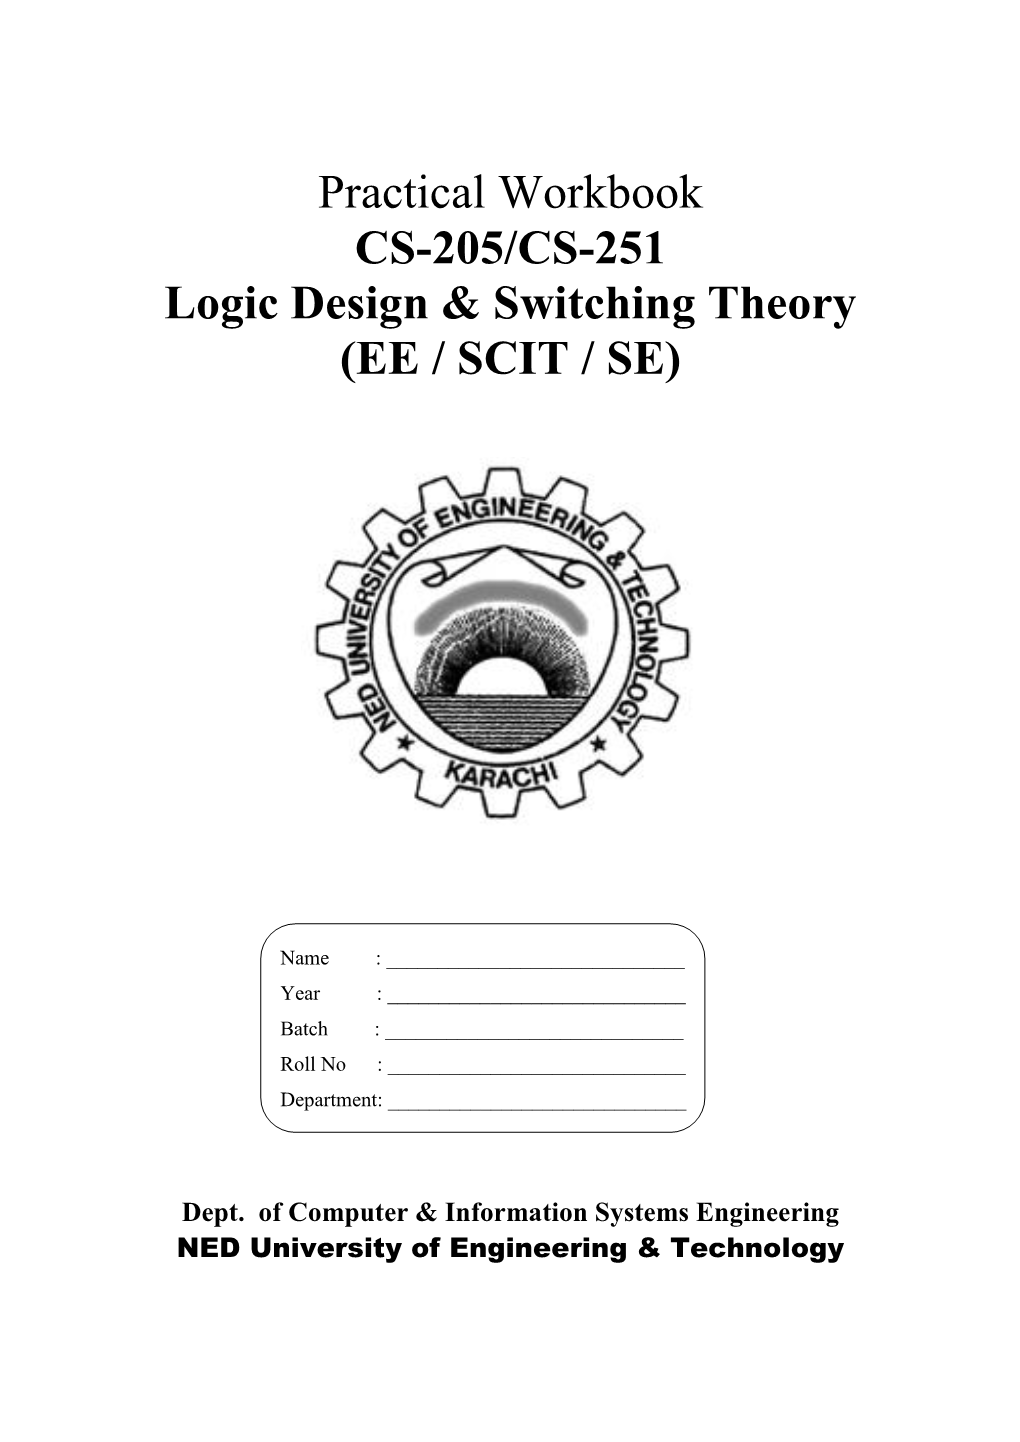 Logic Design and Switching Theory Covers a Variety of Basic Topics, Including Switching Theory, Combinational and Sequential Logic Circuits, and Memory Elements